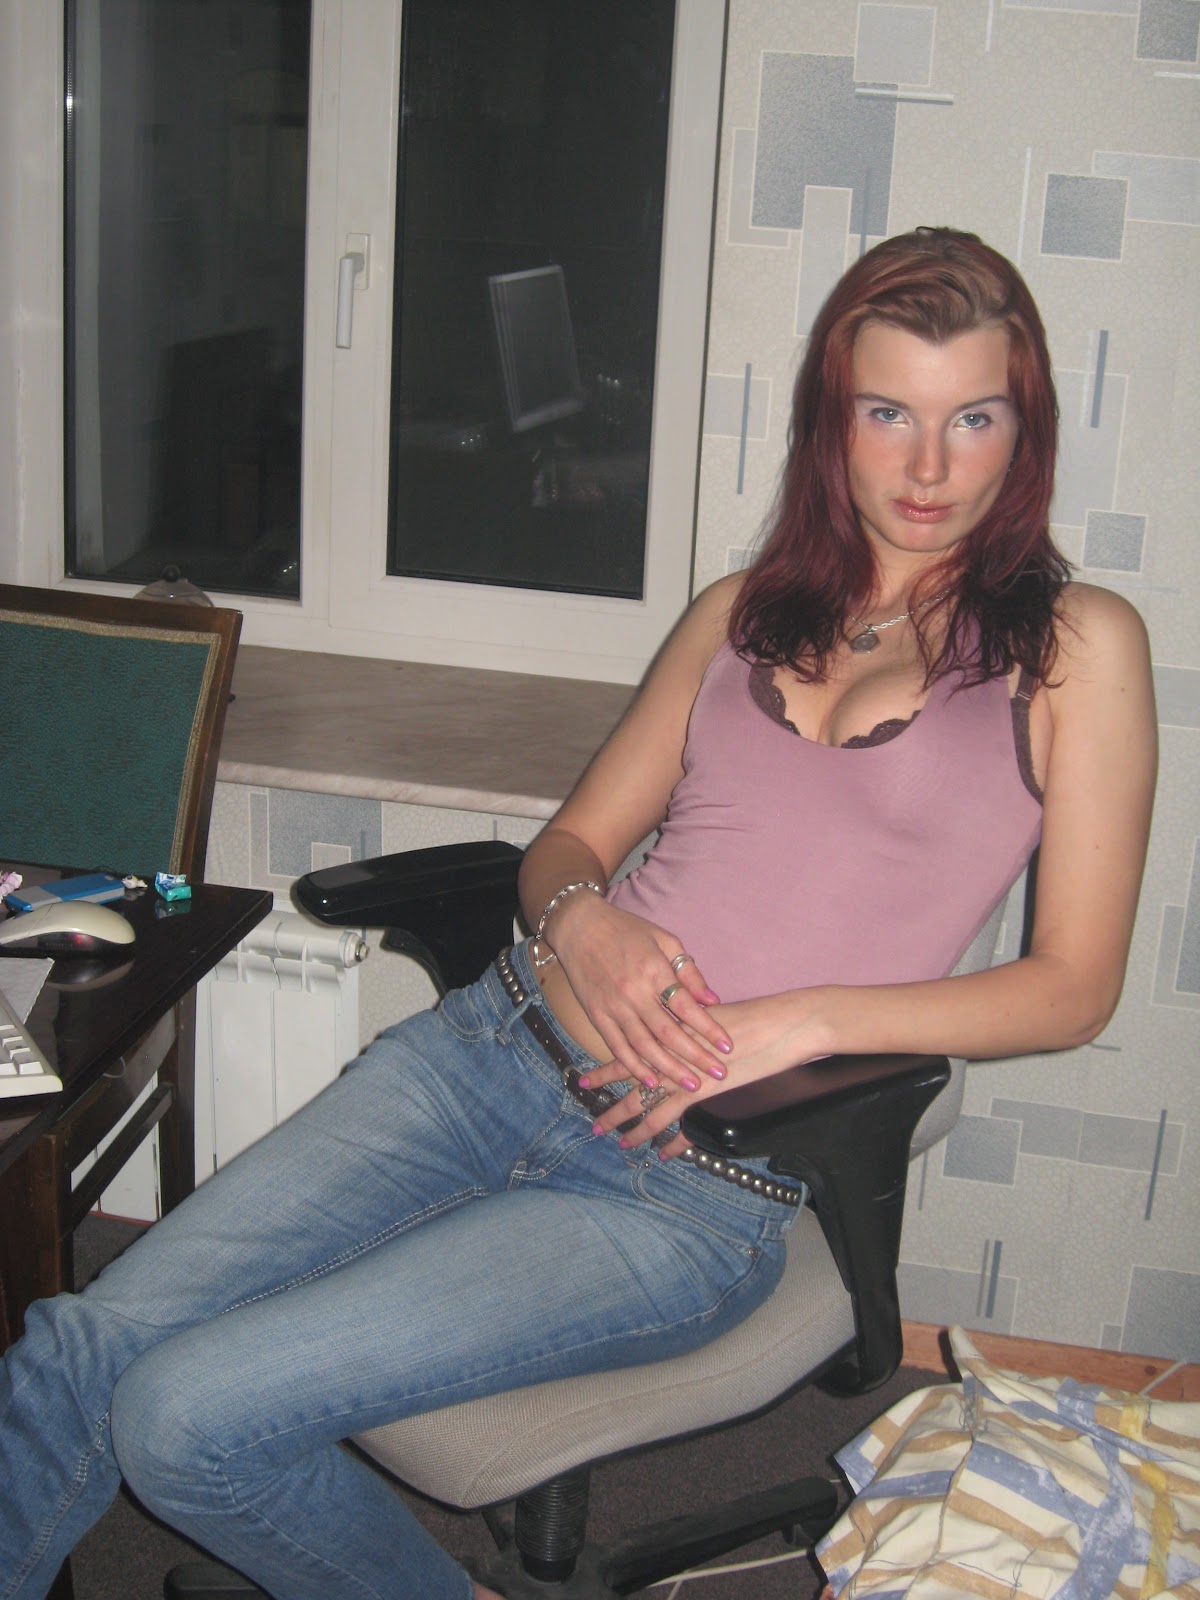 Sexy Russian Teen Redhead Girl Leaked Amateur Photos Naughty Girls X Club Hot Pictues 95625 Hot Sex Picture